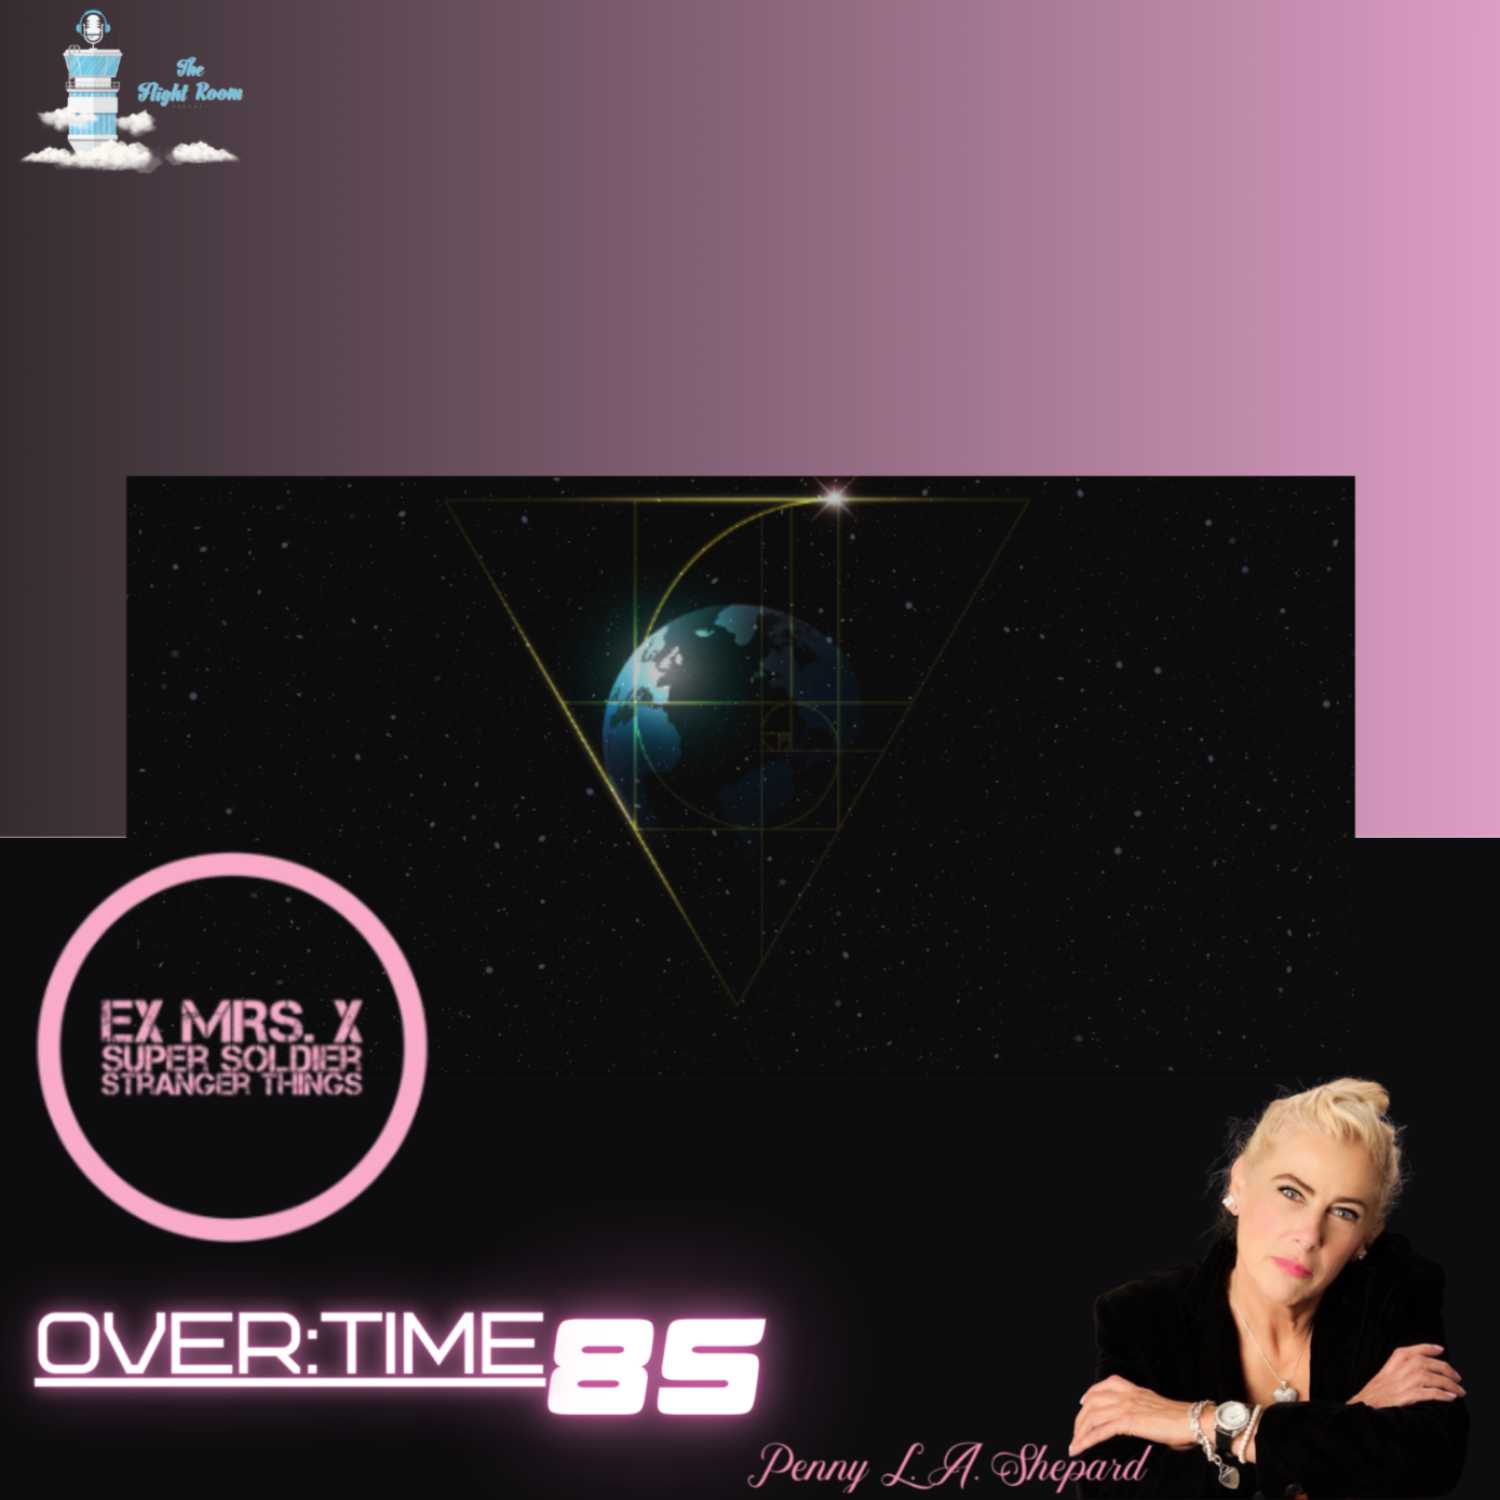 OVER:TIME W/ THE FLIGHT ROOM #85 ( MK ULTRA FEAT. PENNY LA SHEPARD || AGENT X:11 ​)